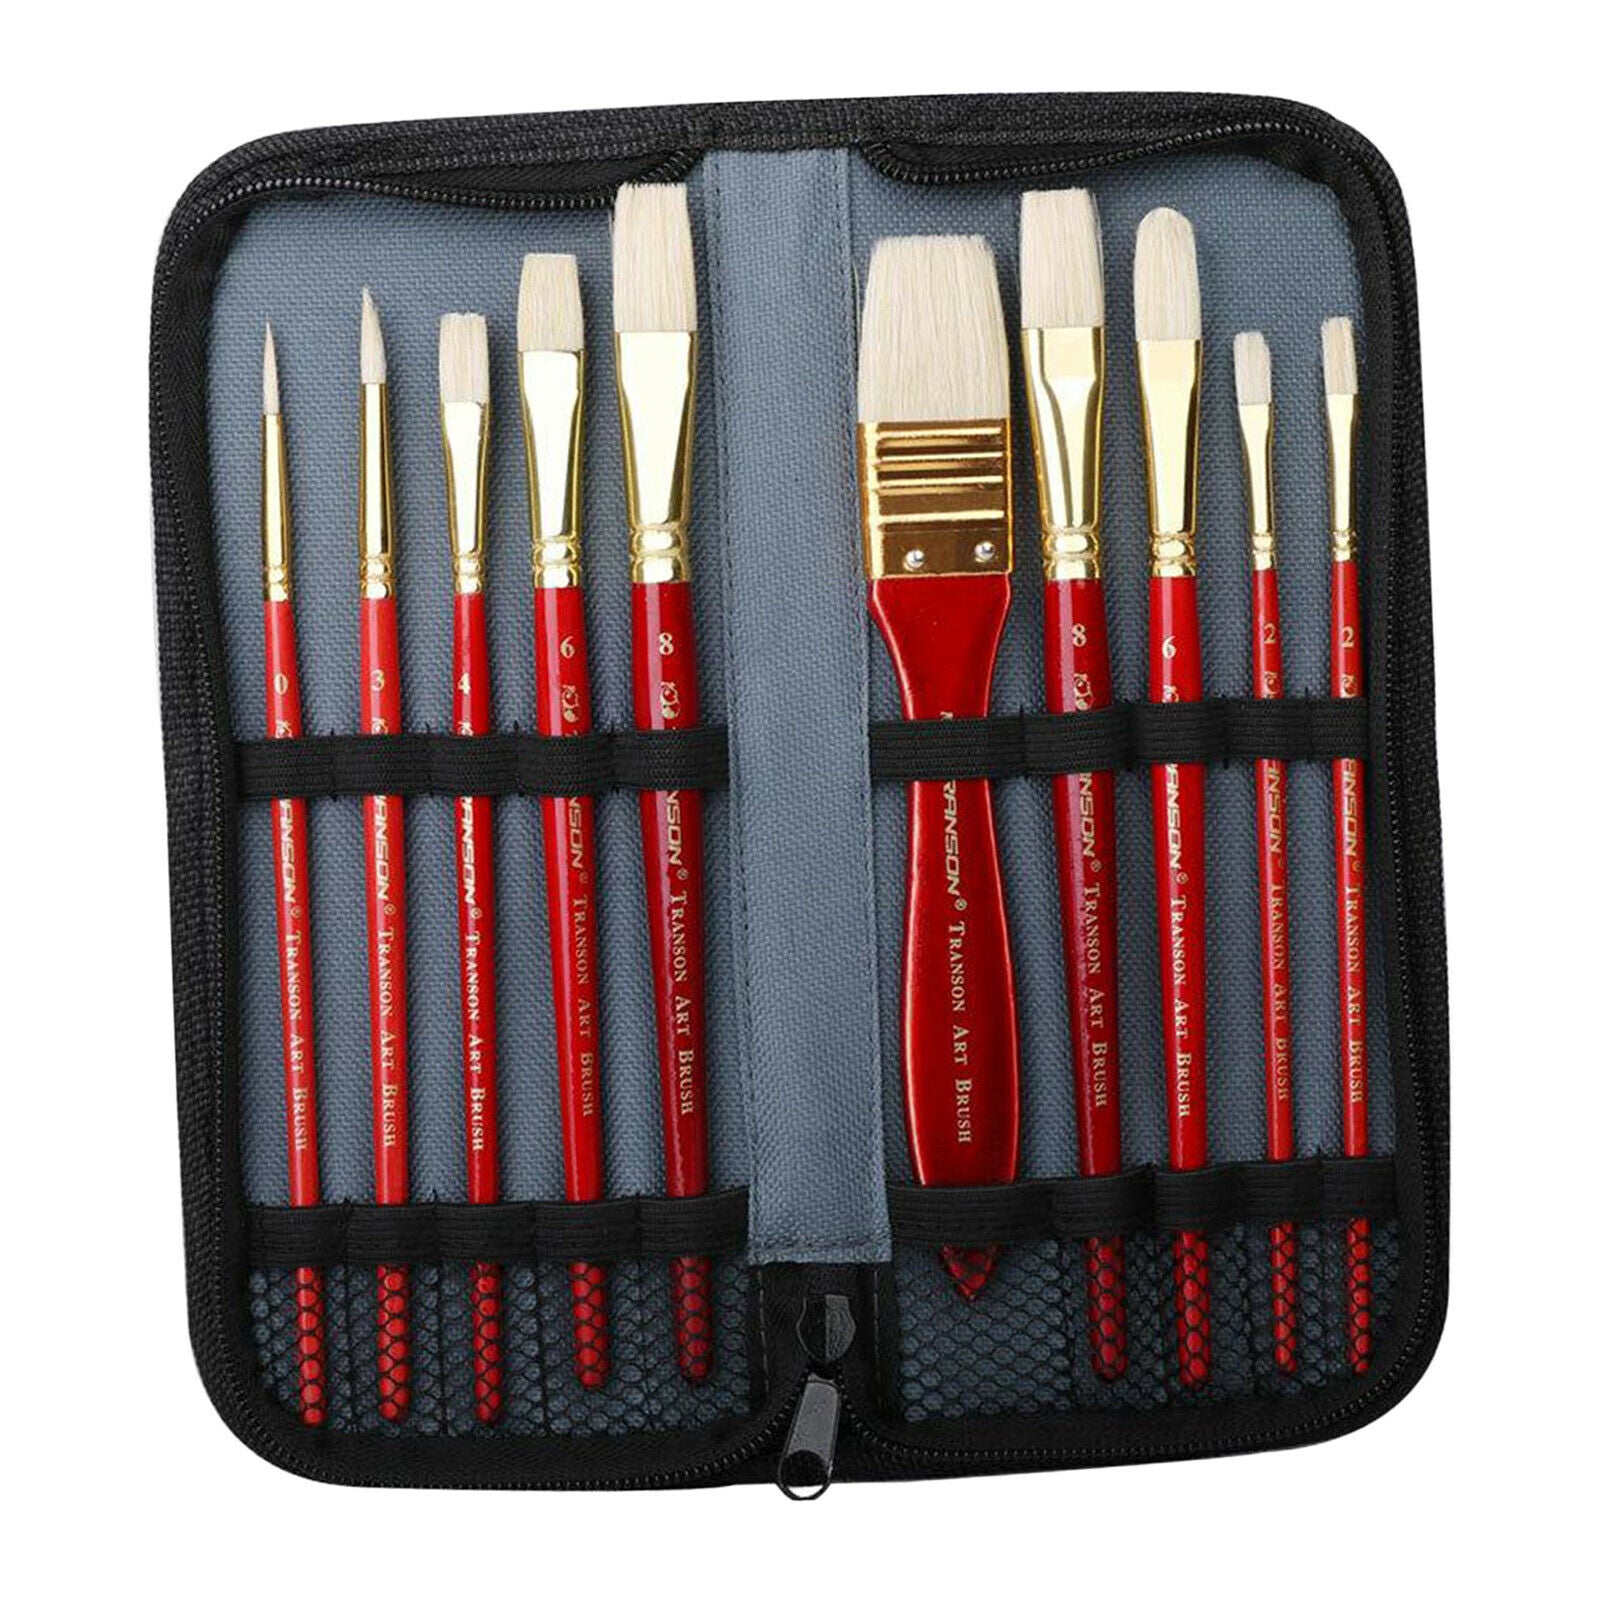 10pcs Art Acrylic Painting Brushes for Watercolor Face Body Painting with Bag